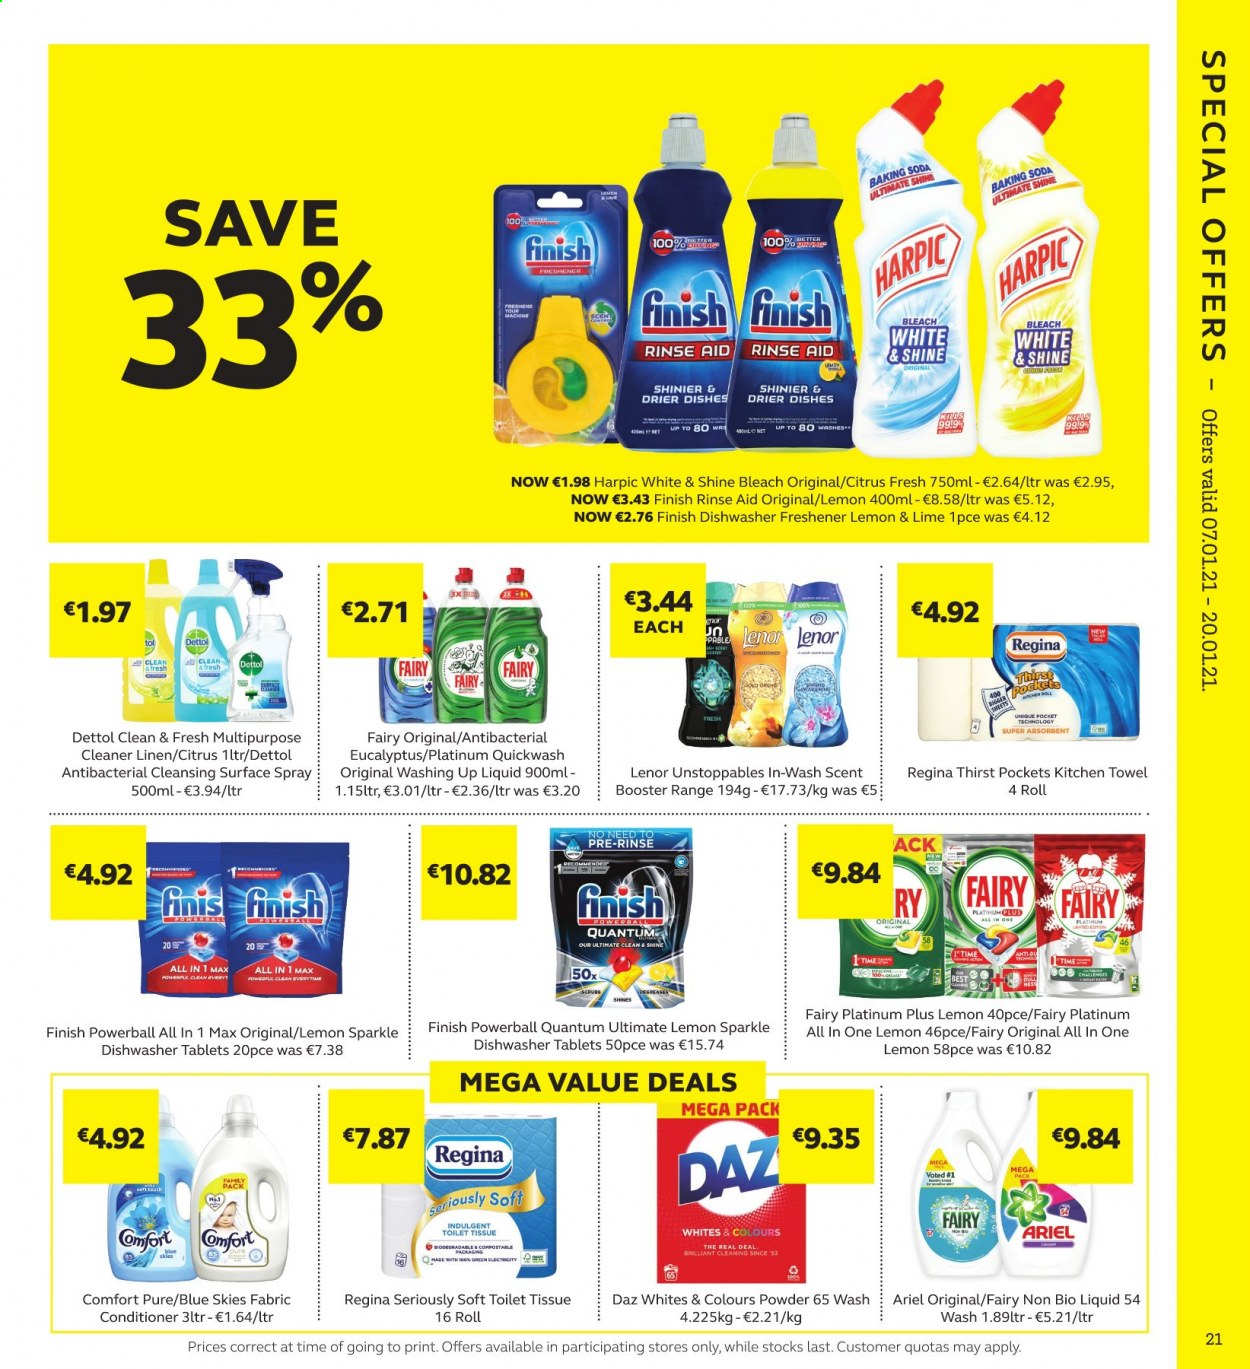 thumbnail - SuperValu offer  - 07.01.2021 - 20.01.2021 - Sales products - bicarbonate of soda, Dettol, toilet paper, tissues, kitchen towels, cleaner, Fairy, Harpic, Ariel, bleach, Daz Powder, Lenor, dishwashing liquid, Finish Powerball, conditioner. Page 21.